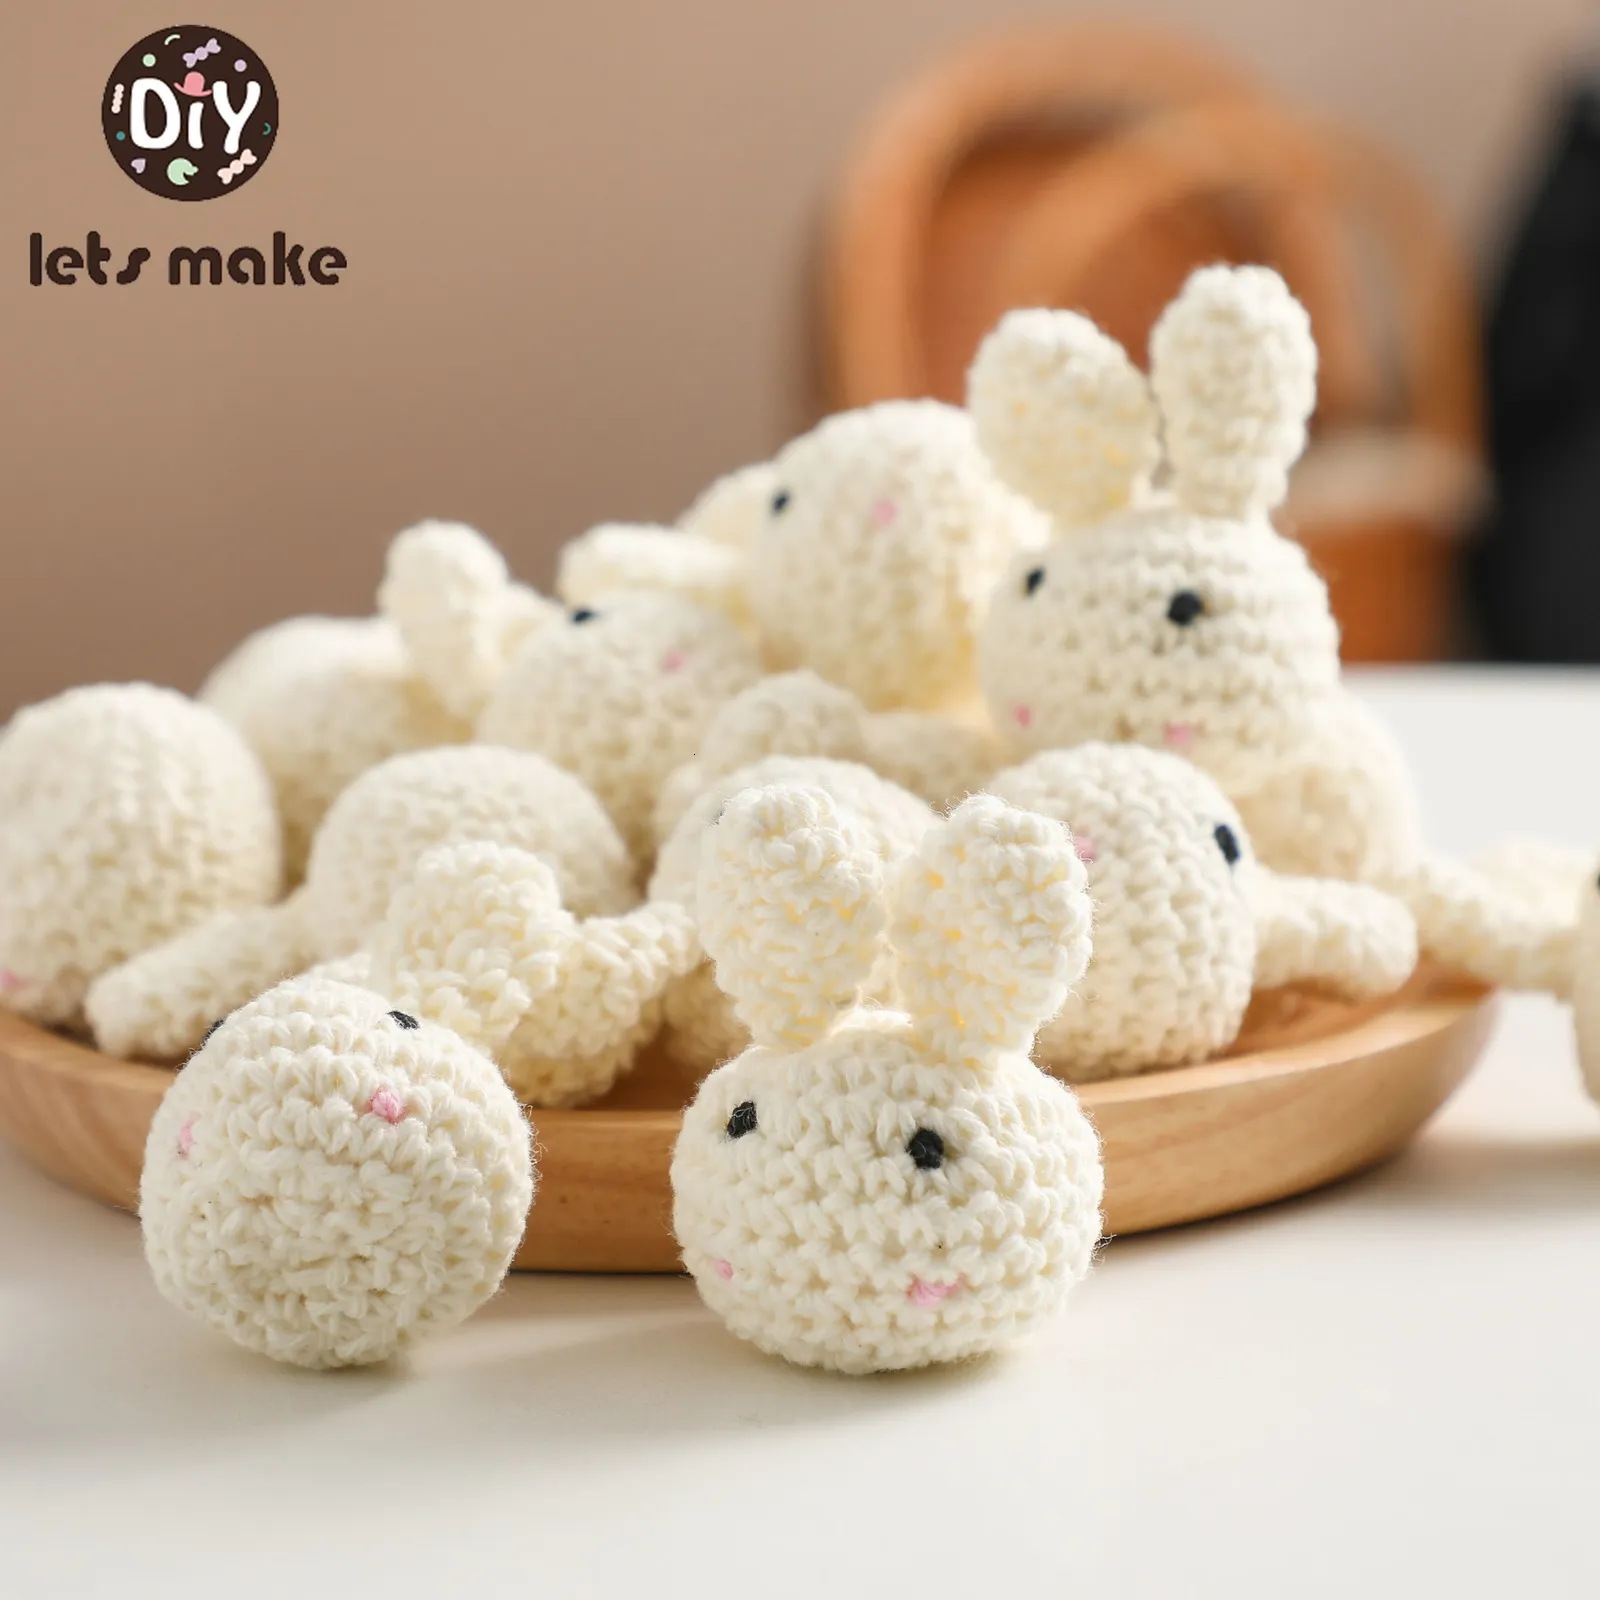 Baby Teethers Toys Let's Make 10pc Baby Teether Animal Crochet Beads Wooden Rodent Teething Bracelet Plush Rabbit For DIY Teething Knitting Beads 230516